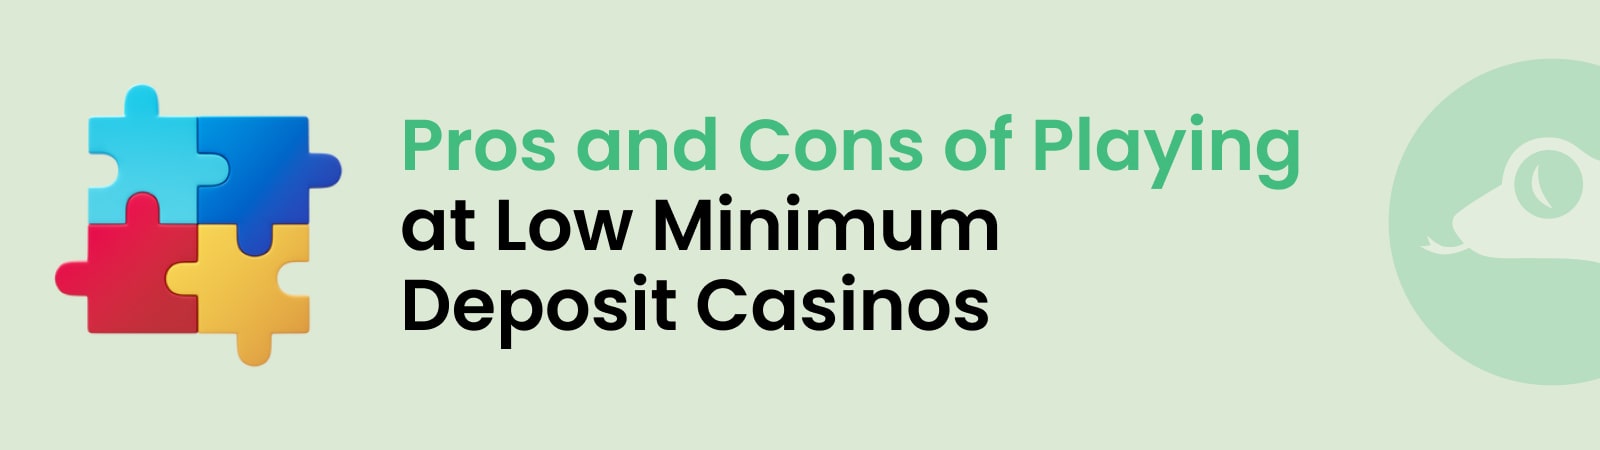 pros and cons of playing at low minimum deposit casinos